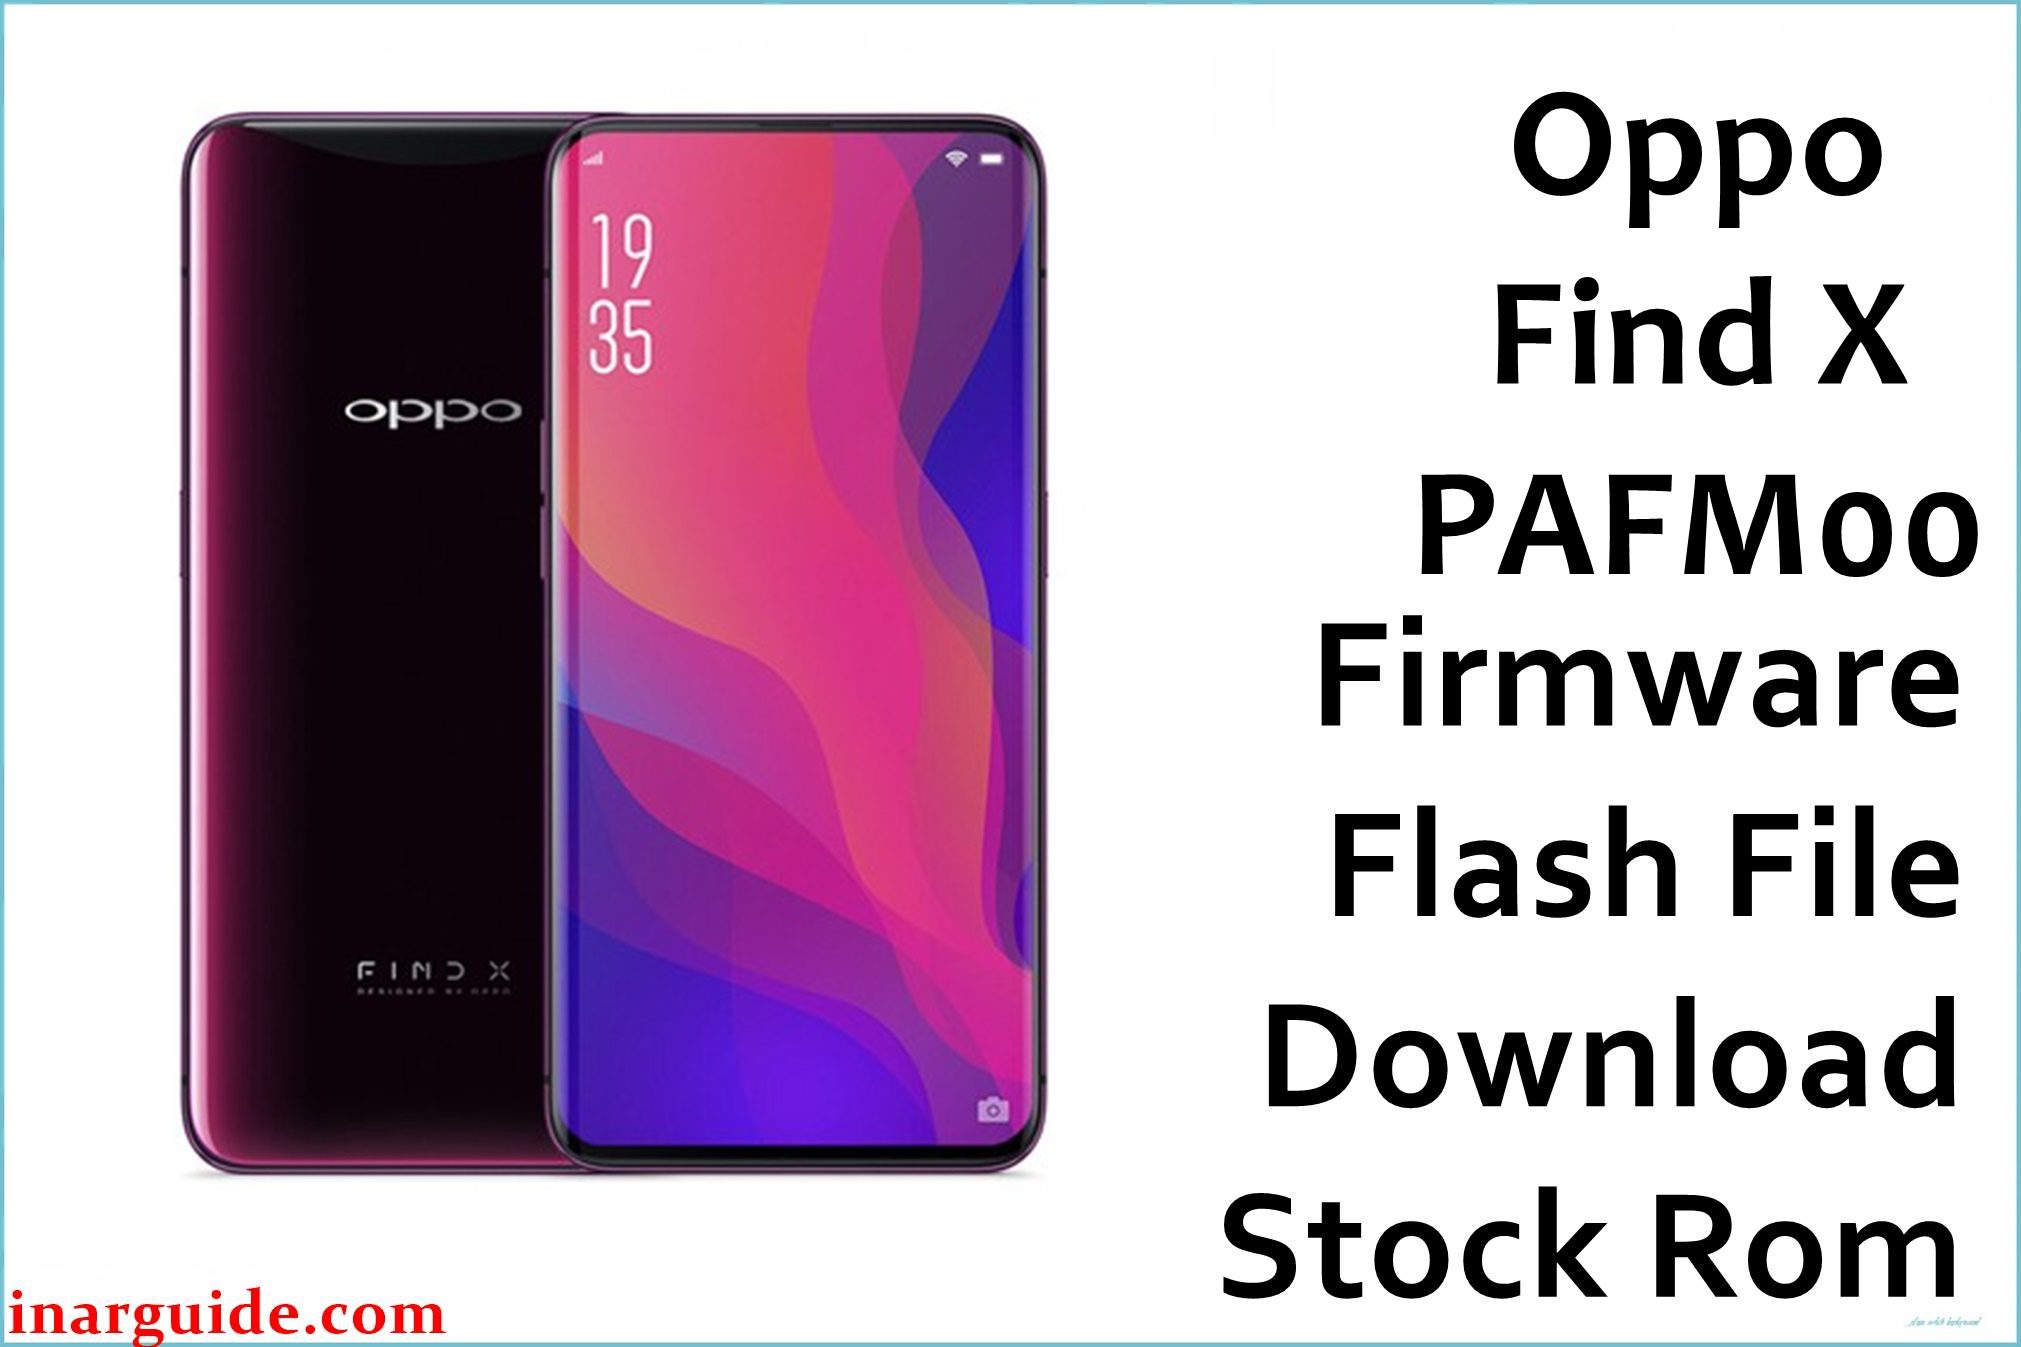 Oppo Find X PAFM00